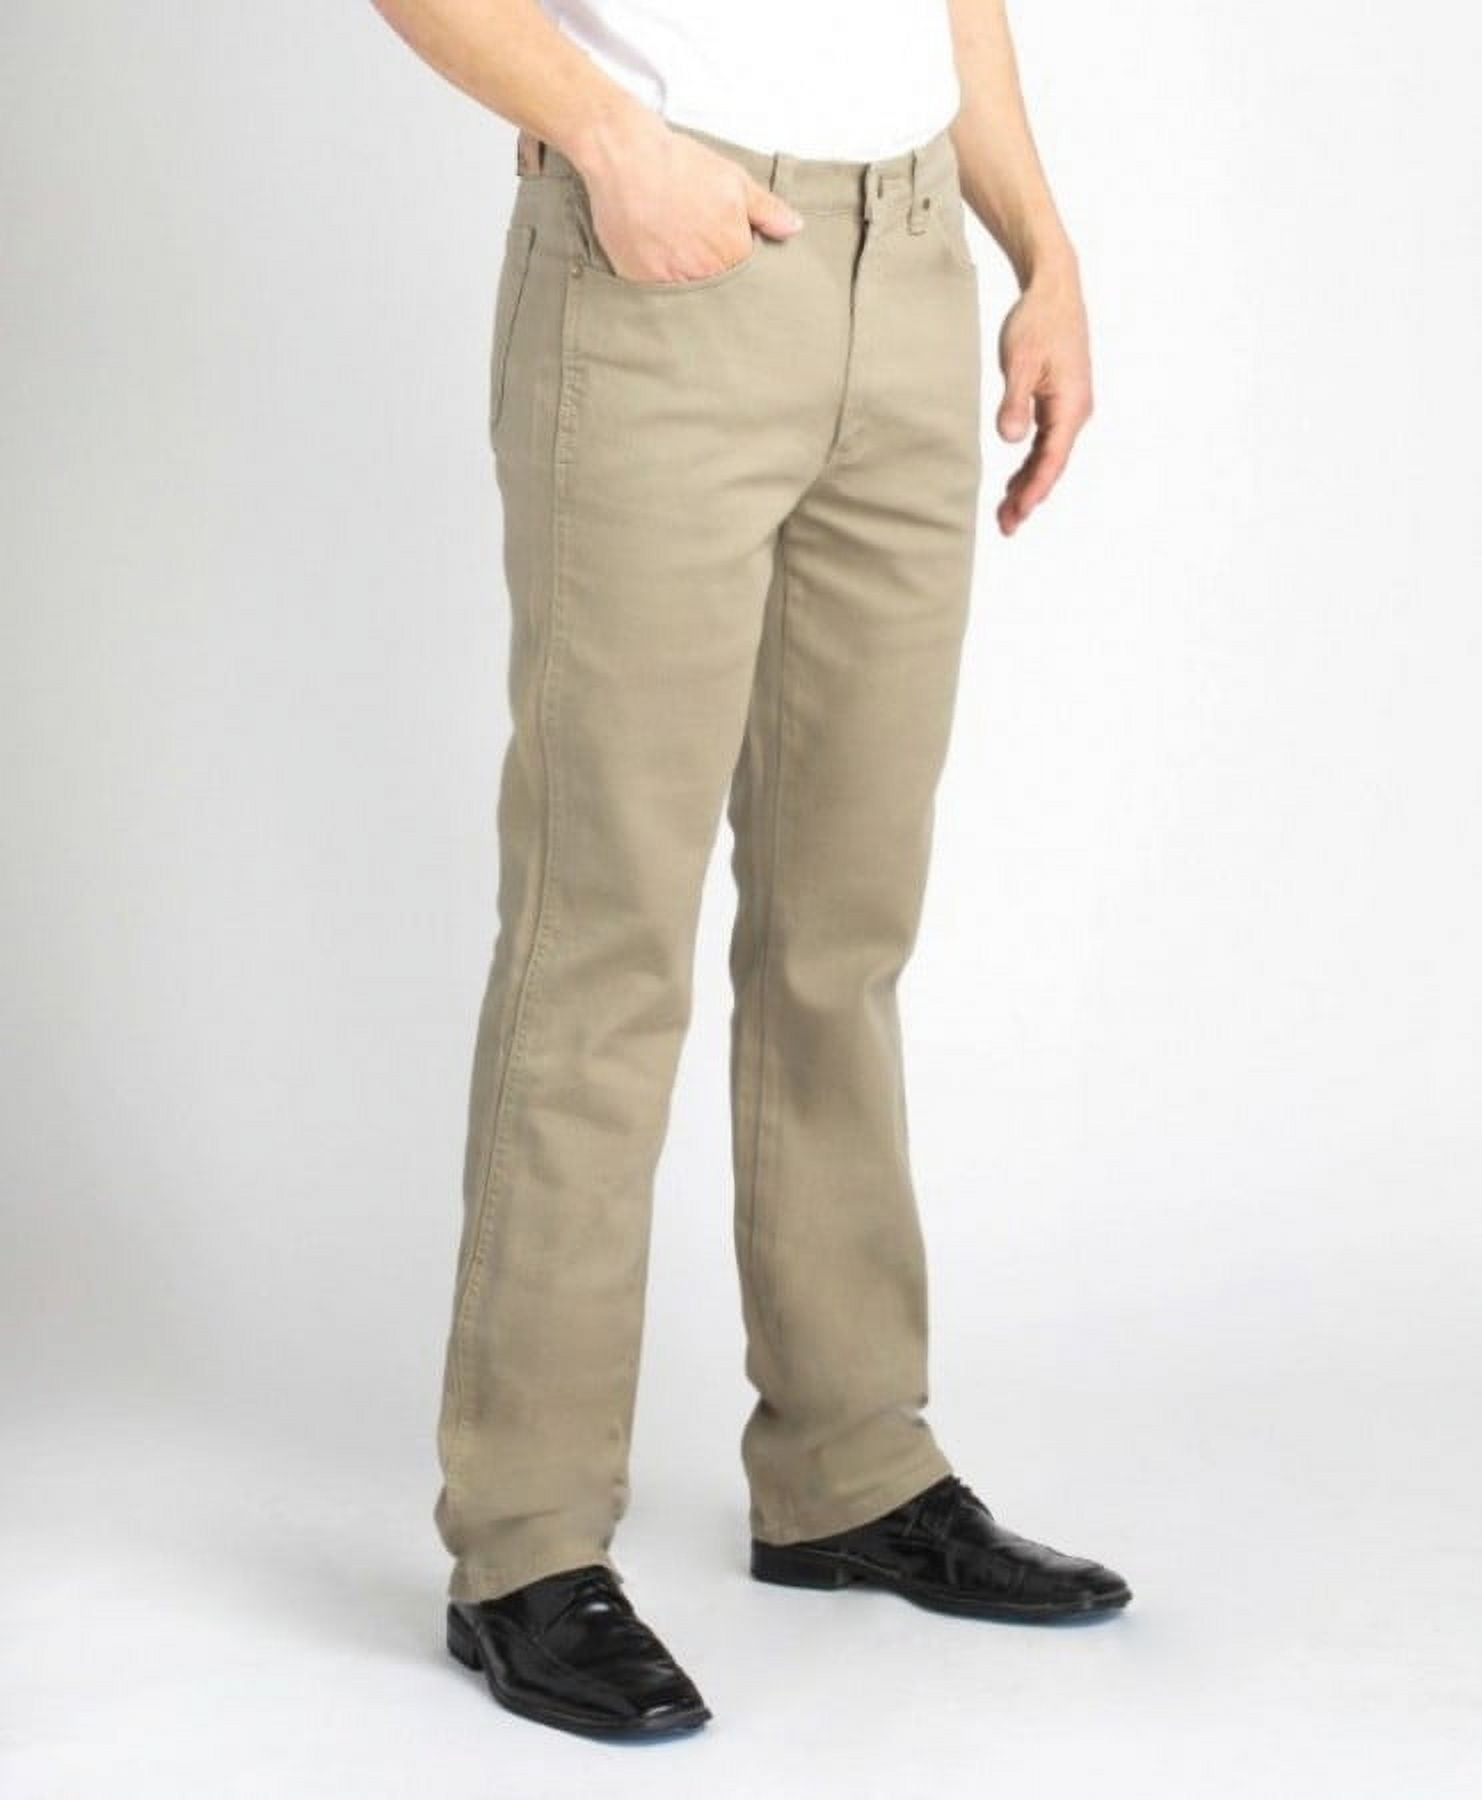 Victorious Men's Basic Essential Flared Jeans Khaki 32 